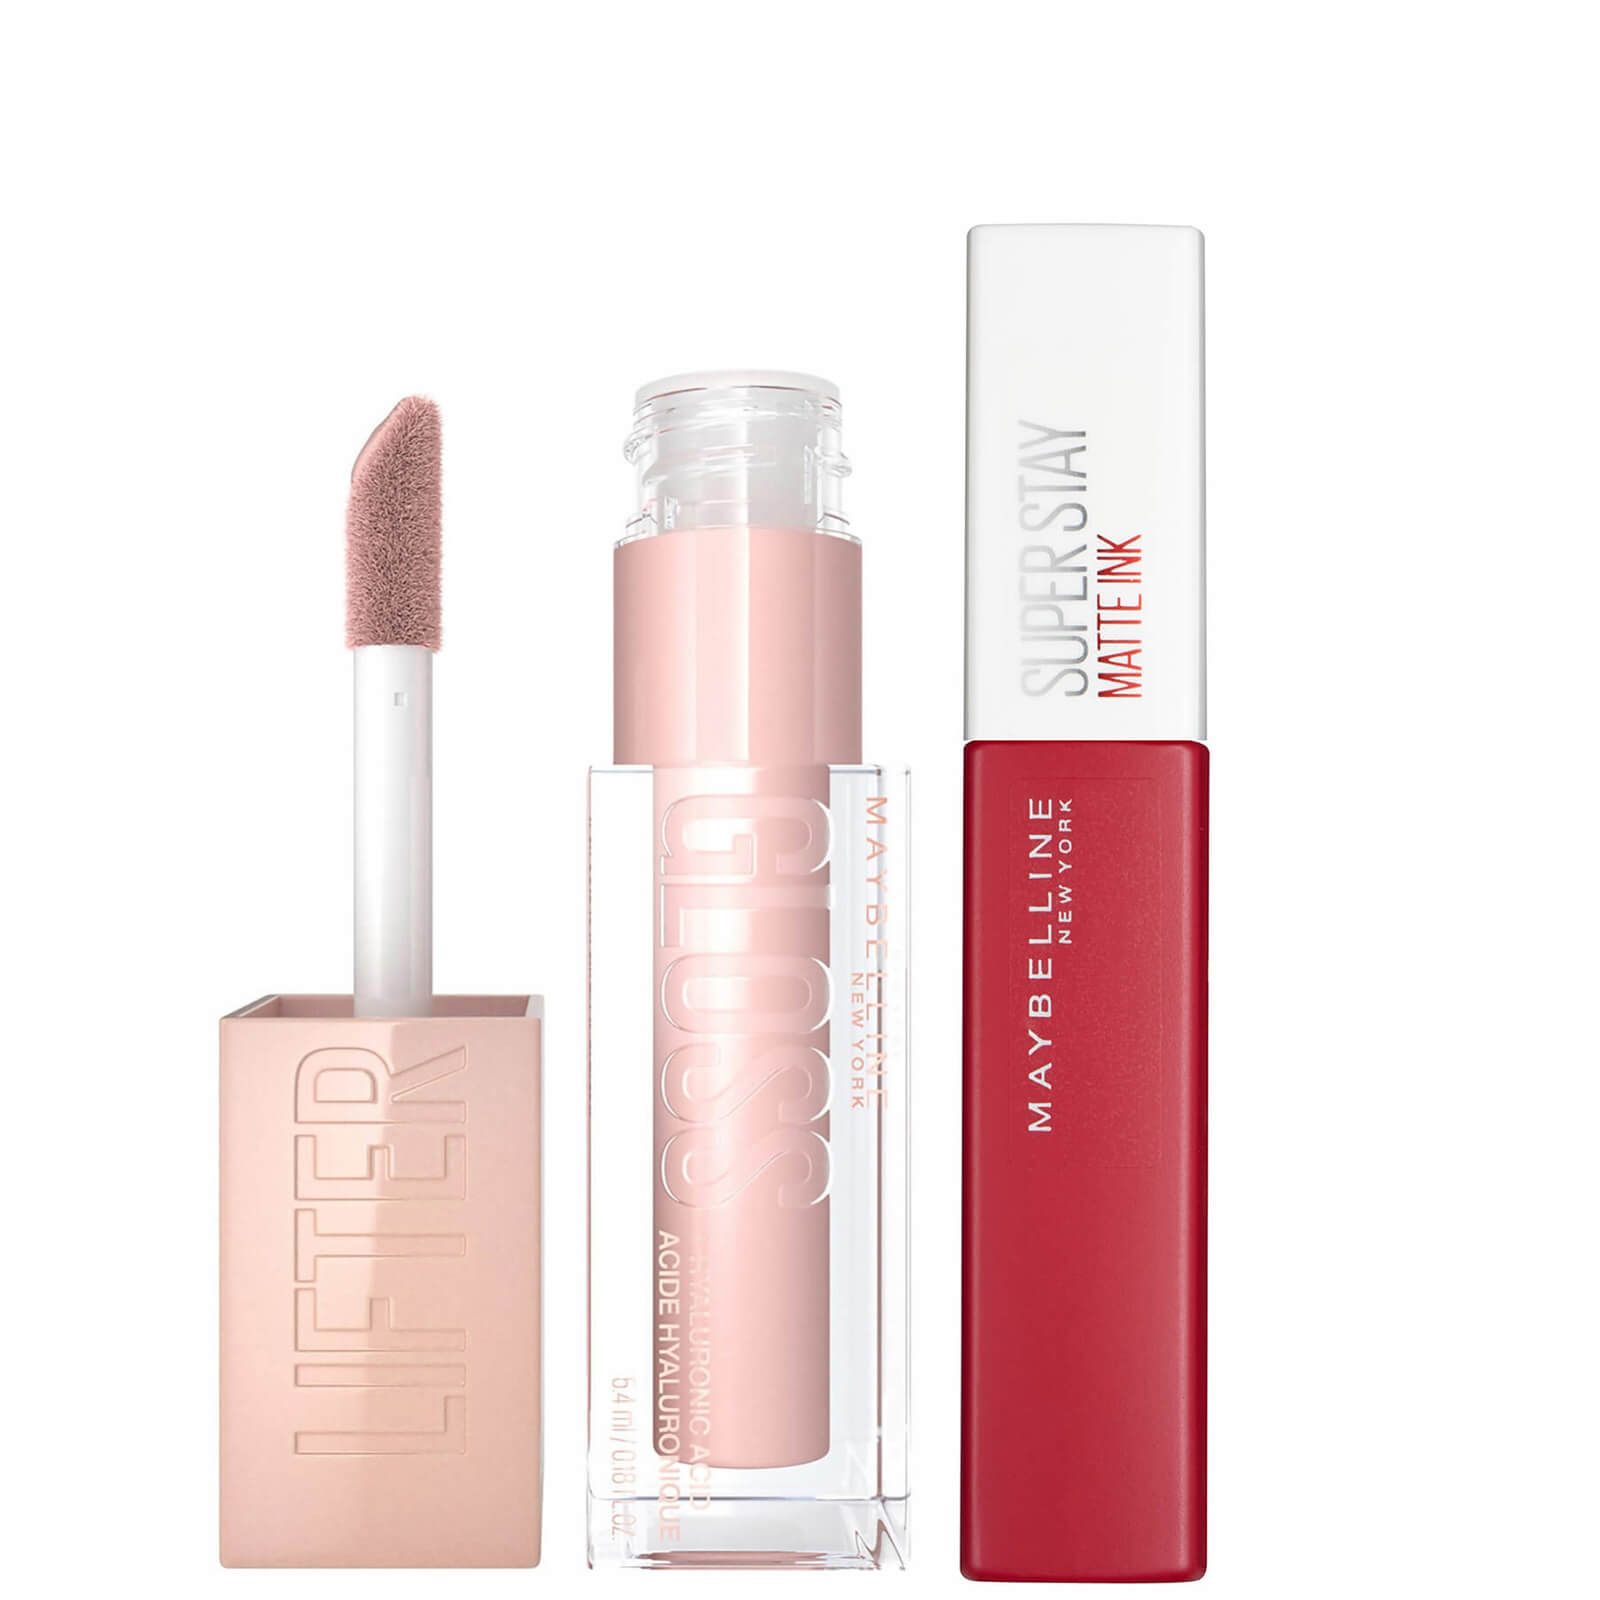 Maybelline Lifter Gloss And Superstay Matte Ink Lipstick Bundle (various Shades) - 20 Pioneer